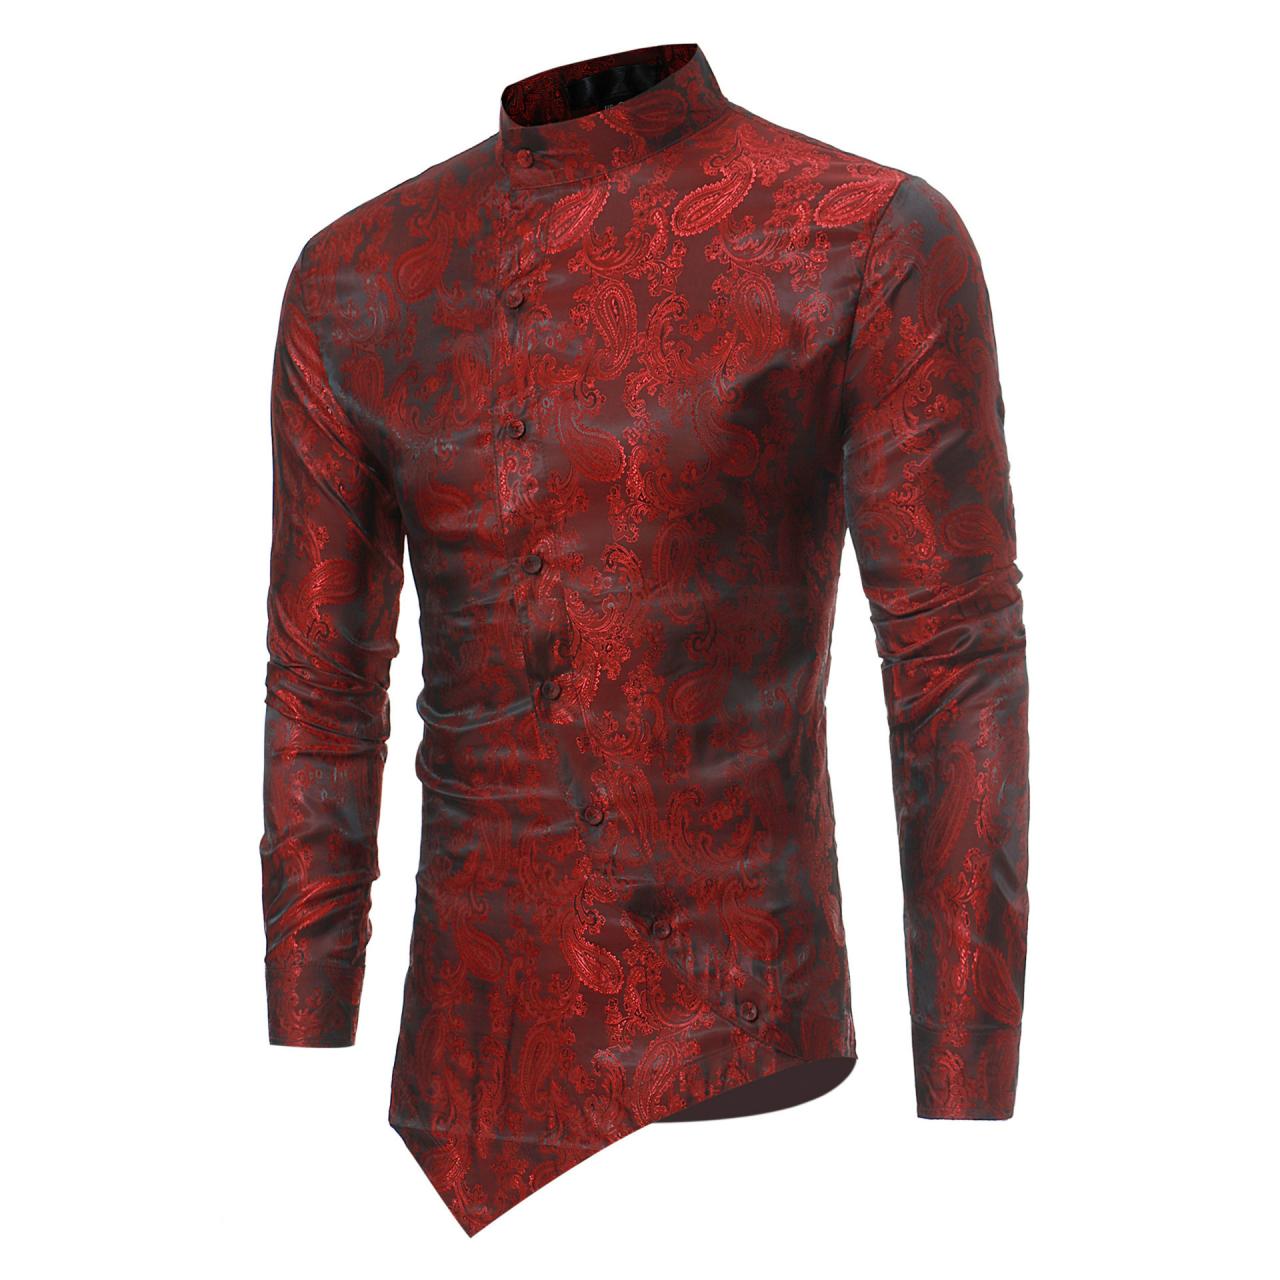  Men Asymmetrical Shirt Spring Autumn Long Sleeve Stand Collar Business Printed Slim Fit Shirt wine red